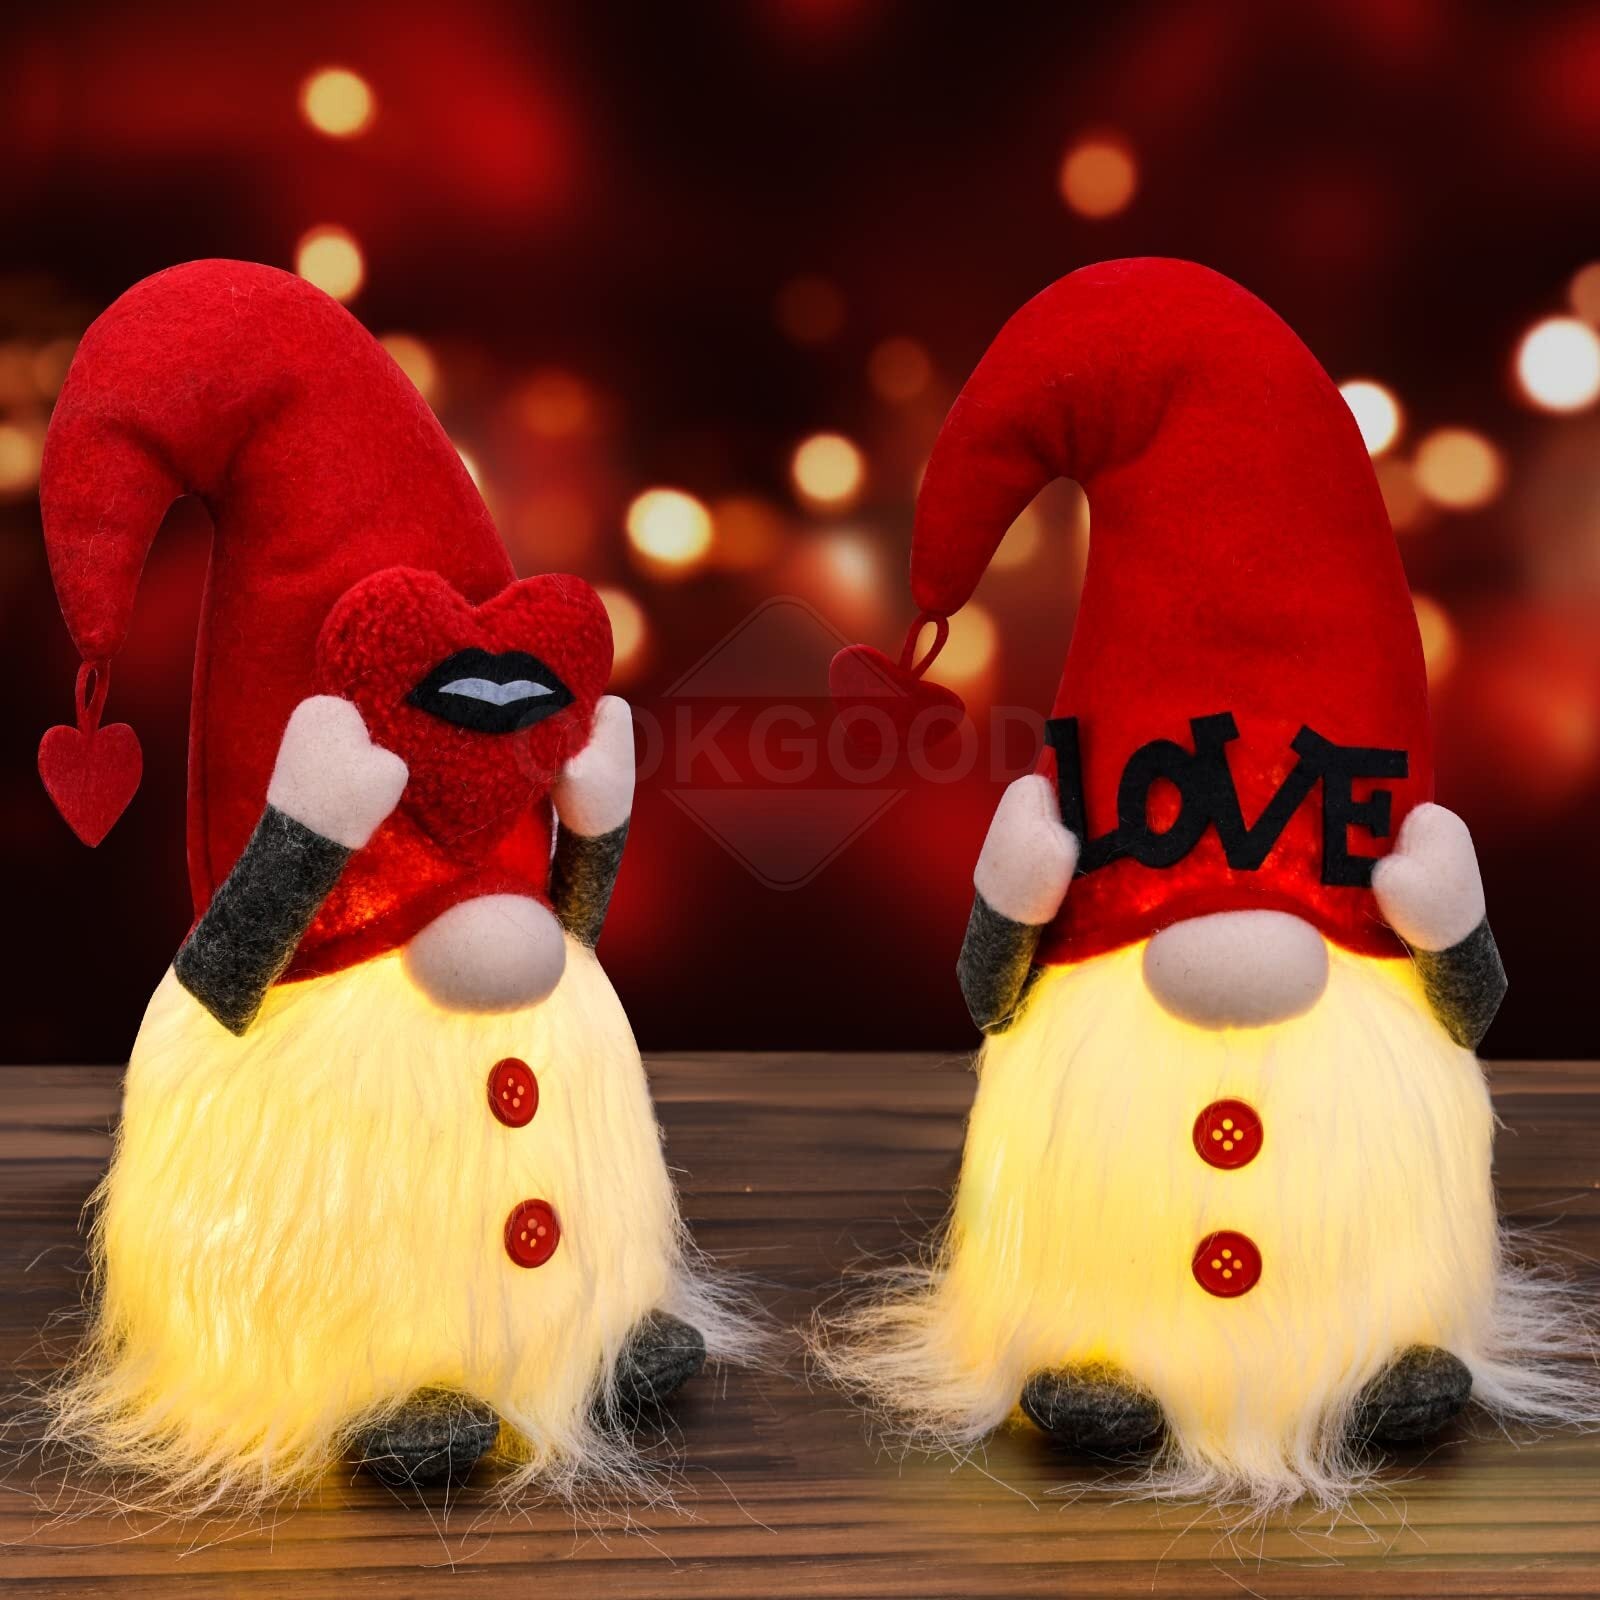 Loving Your Kiss - Adorable Gnome Couple With LED Lights